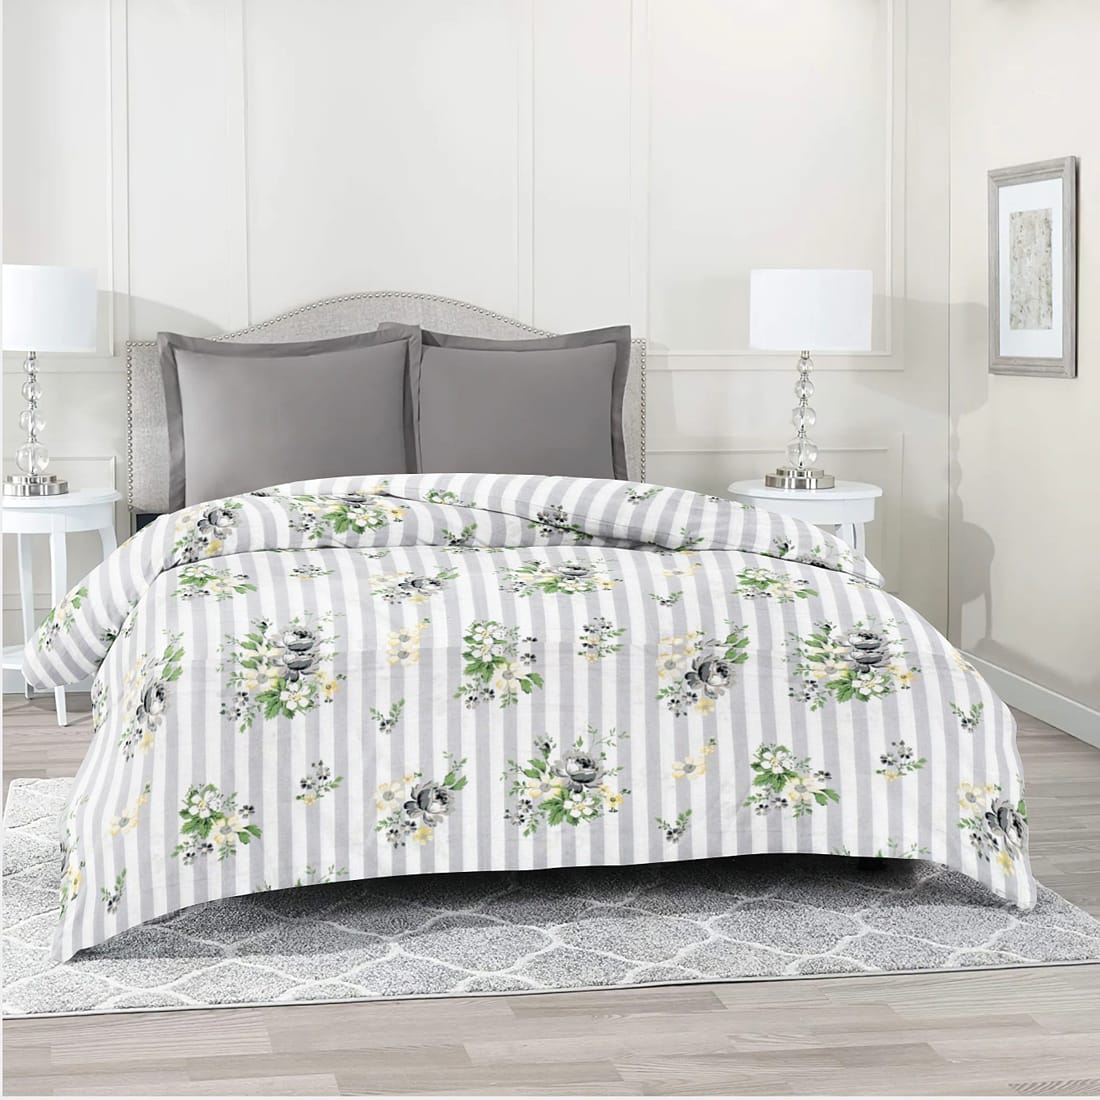 Comfy 250 TC Grey Floral Print Cotton Duvet Cover online in India